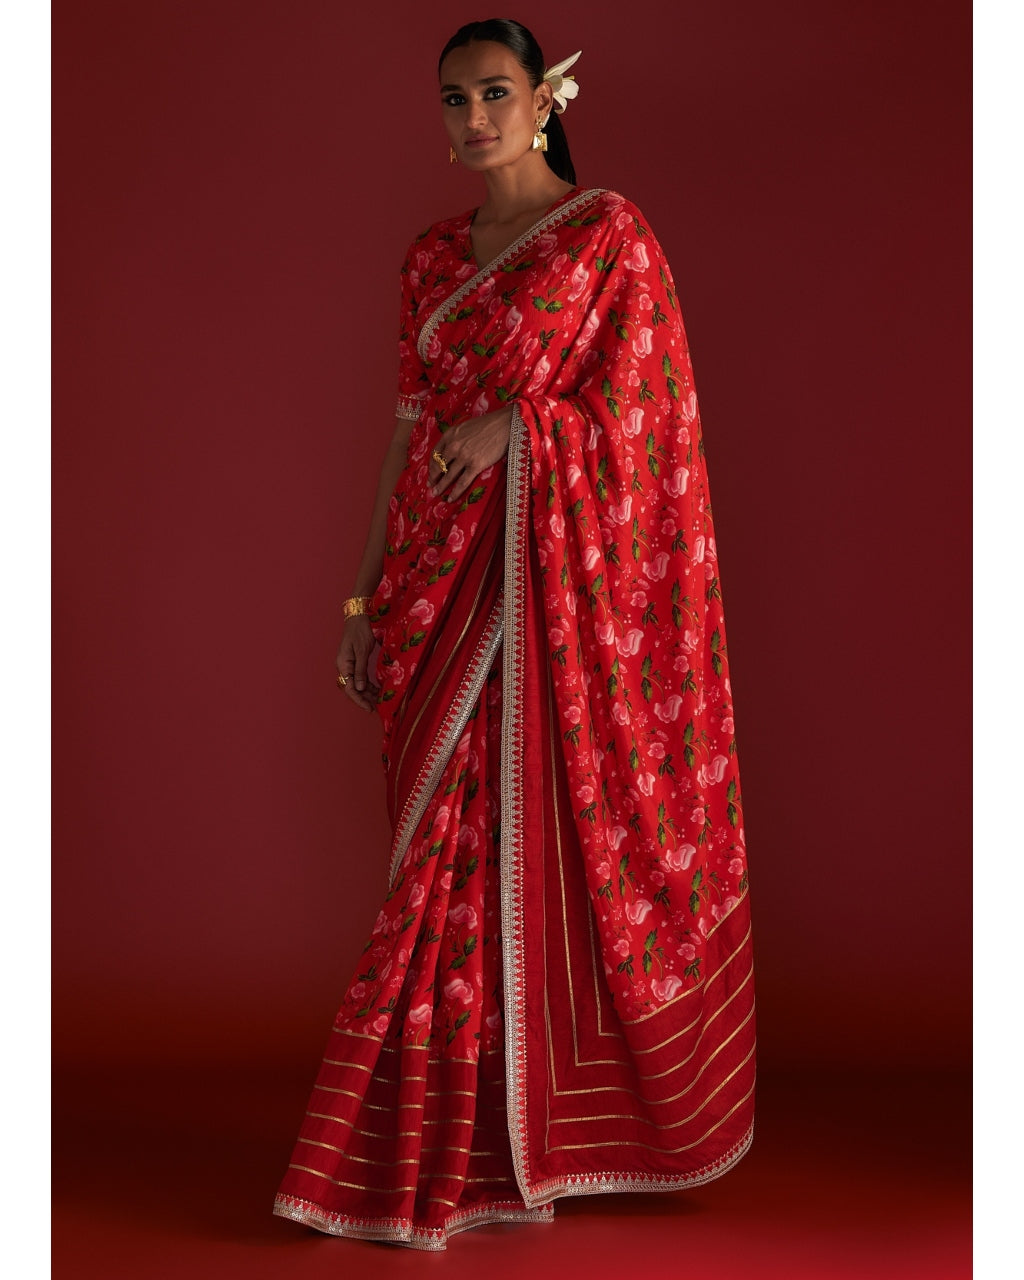 Red Crushed Honeycomb Sari By House Of Masaba